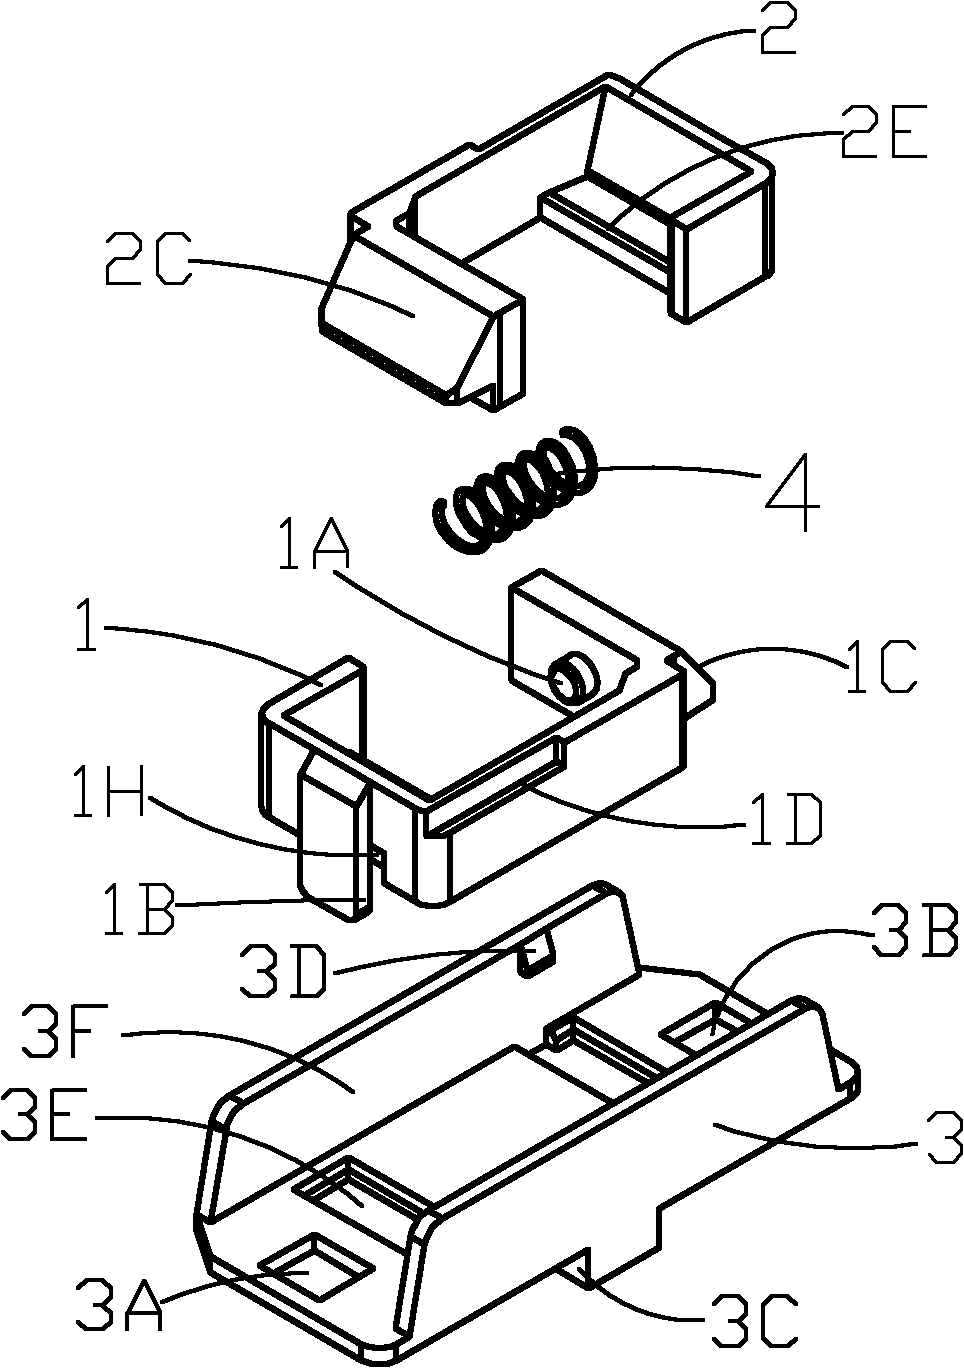 Power socket with safety shielding device of power jack